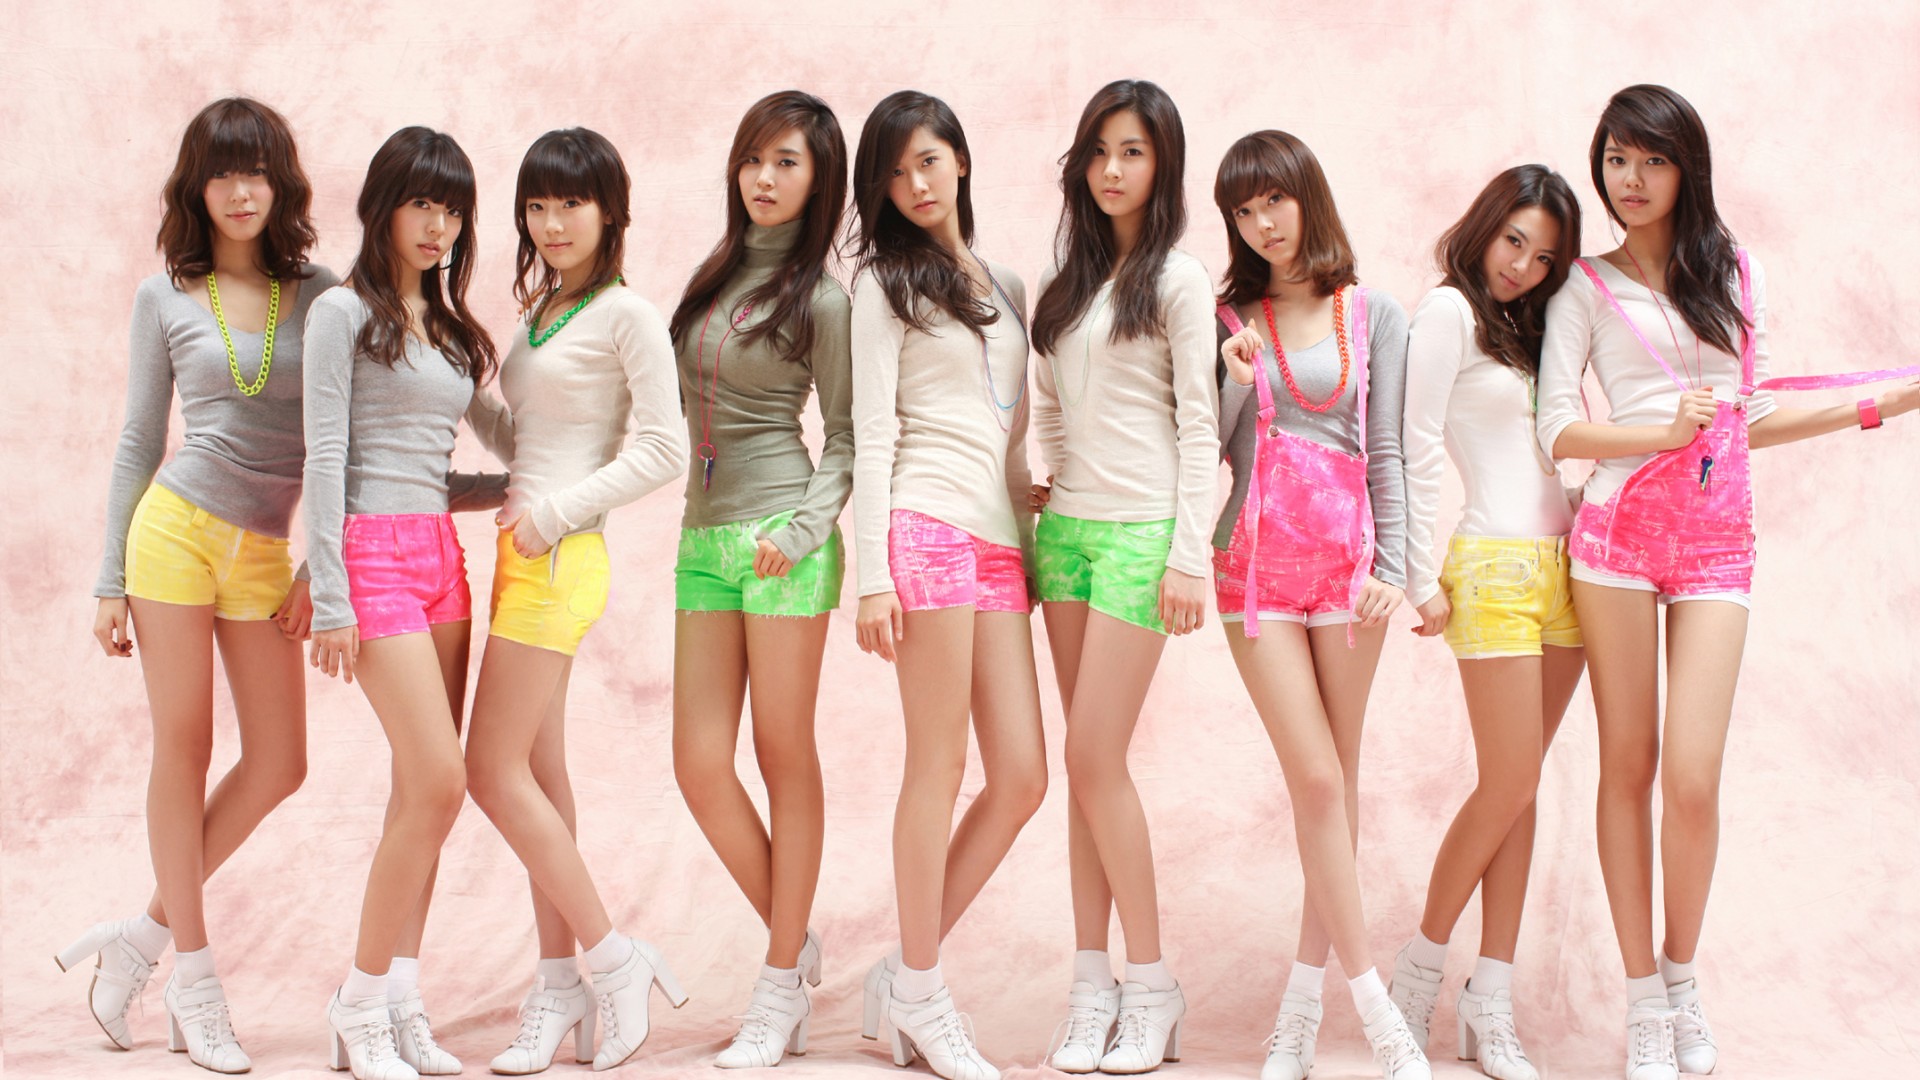 1920x1080 > SNSD Wallpapers